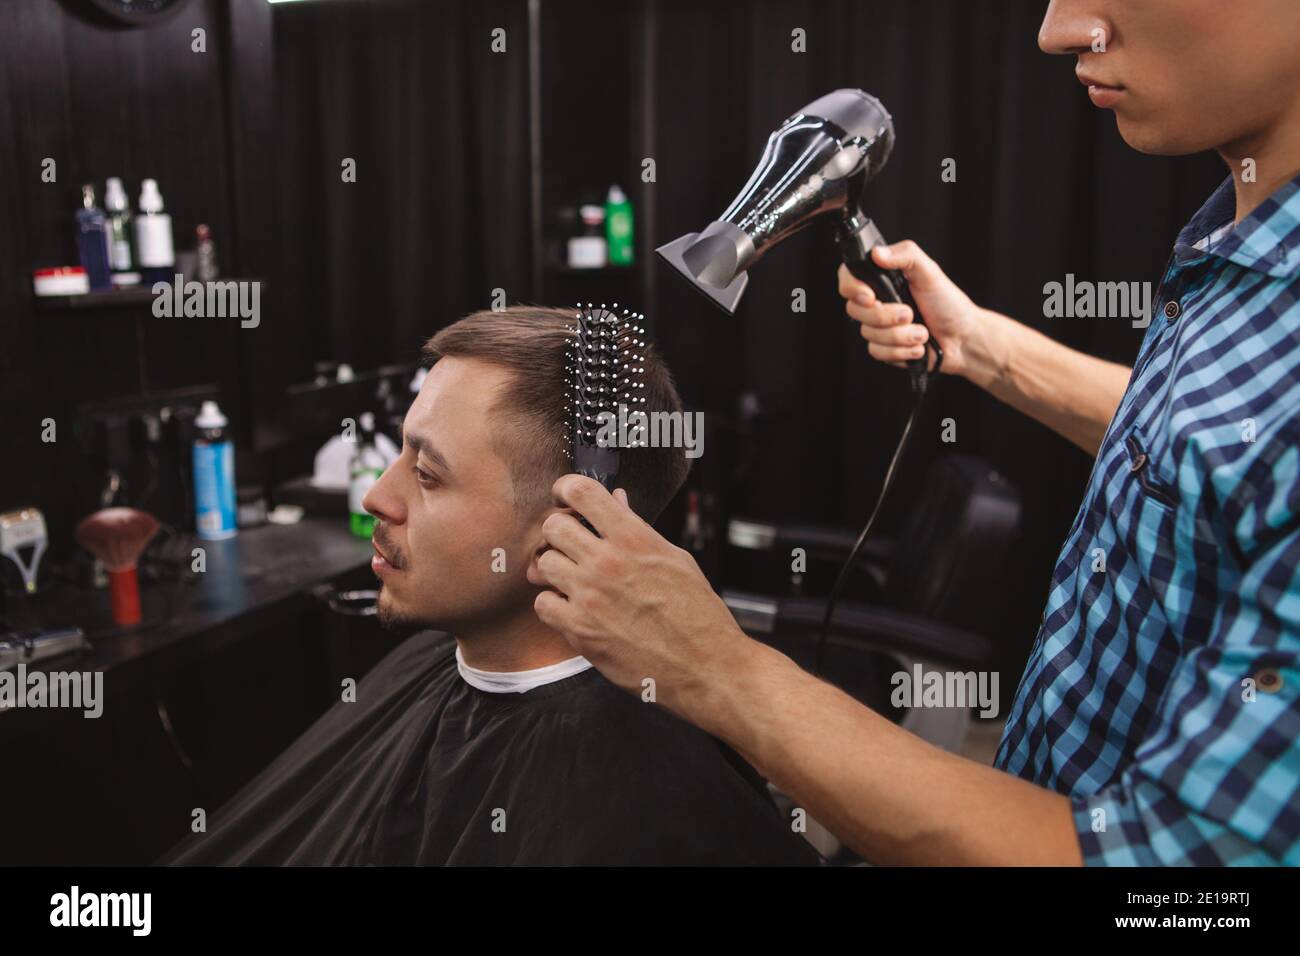 Mature man enjoying getting a new hairstyle by professional barber. Hairstylist blow drying hair of a male client. Barbershop, hair care concept Stock Photo